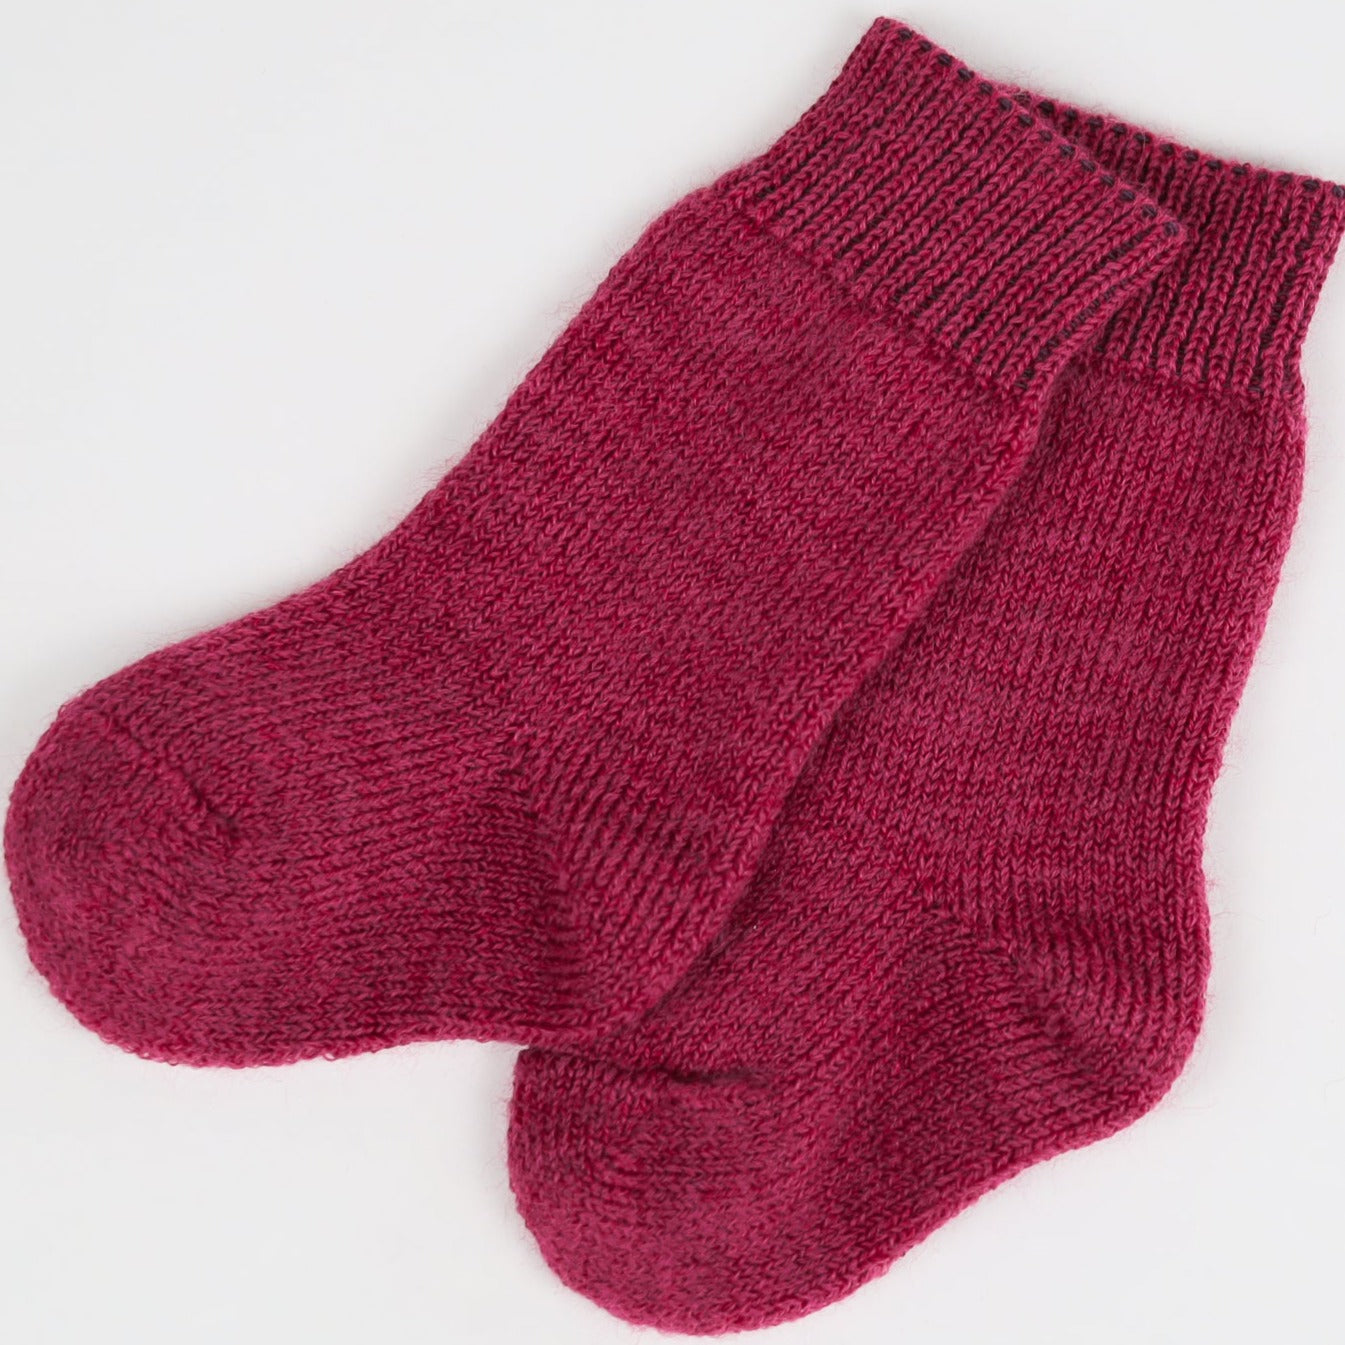 Hirsch Natur Child Sock - Thick Merino Wool – Warmth and Weather